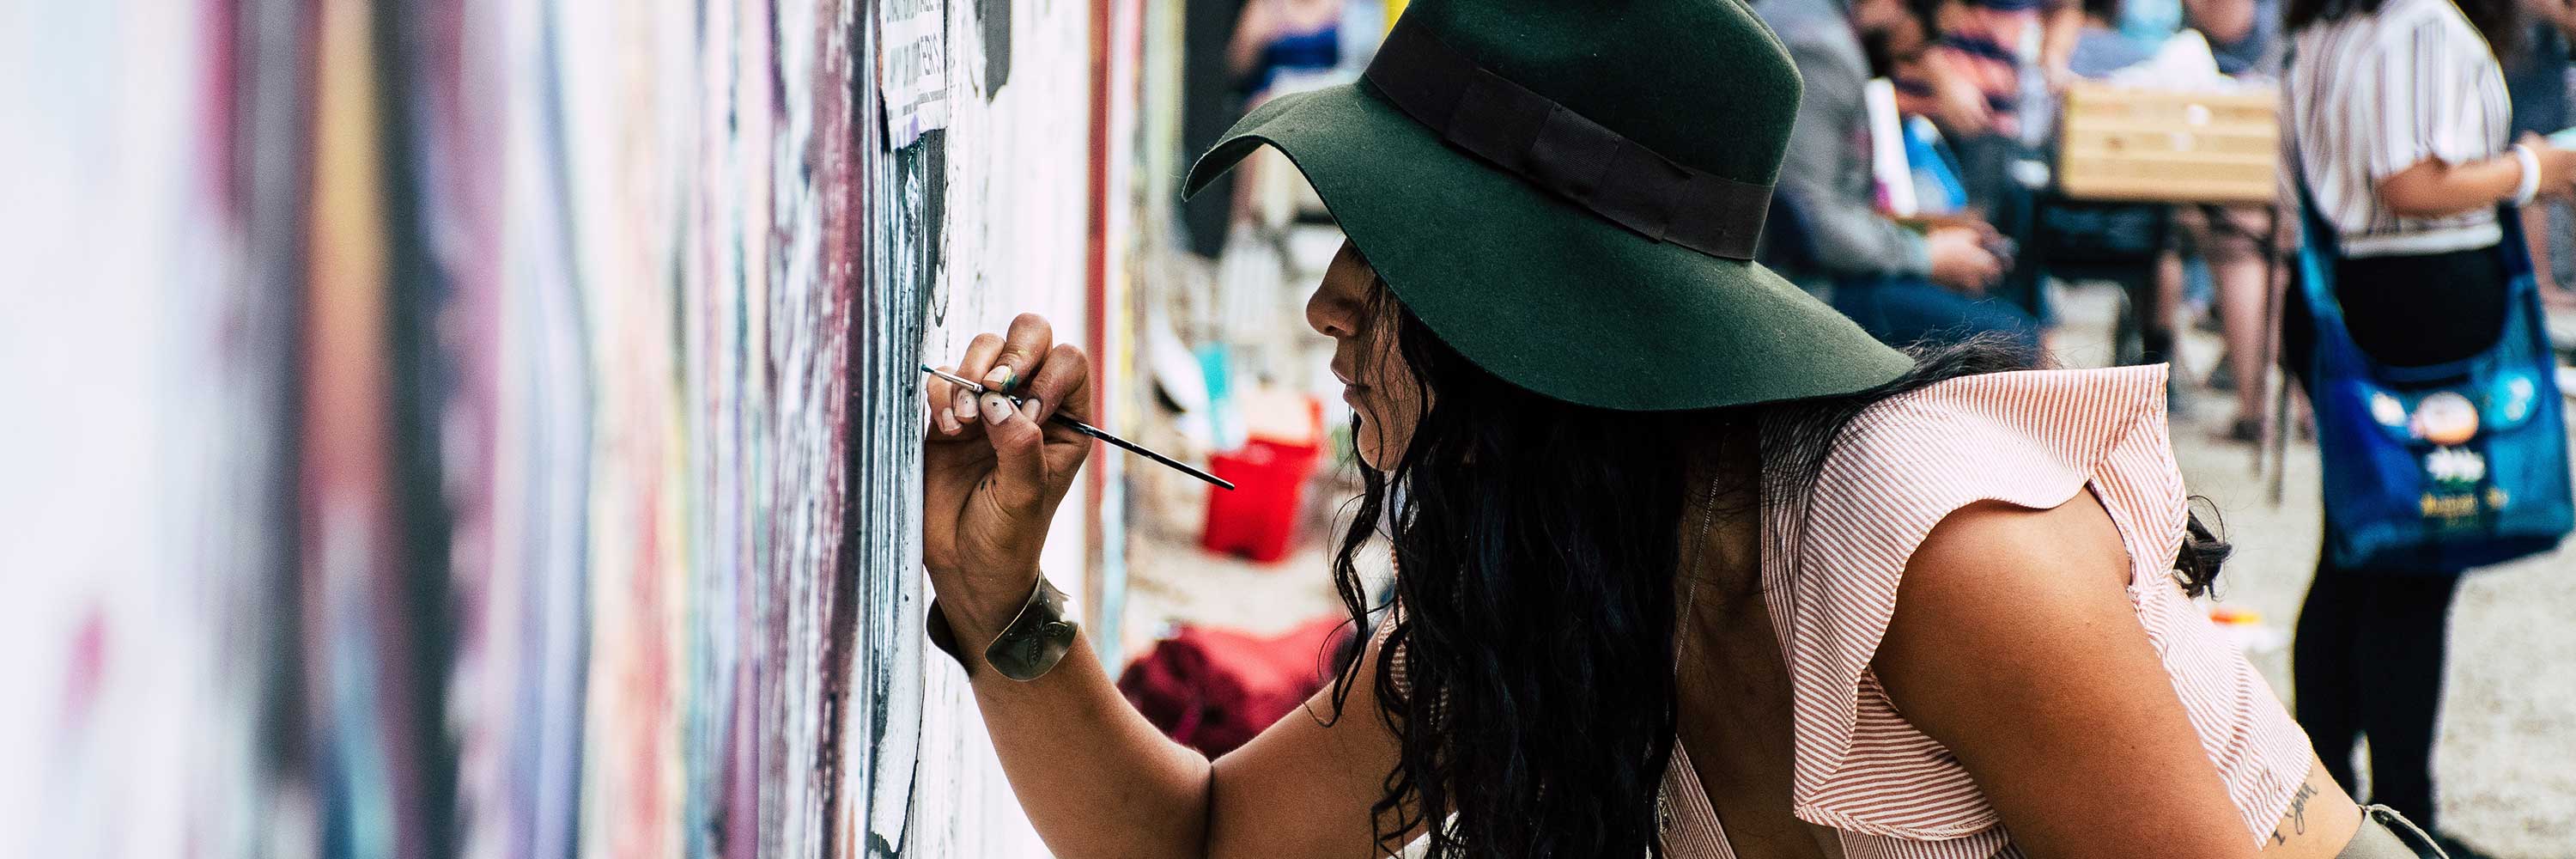 Young woman paints a mural.